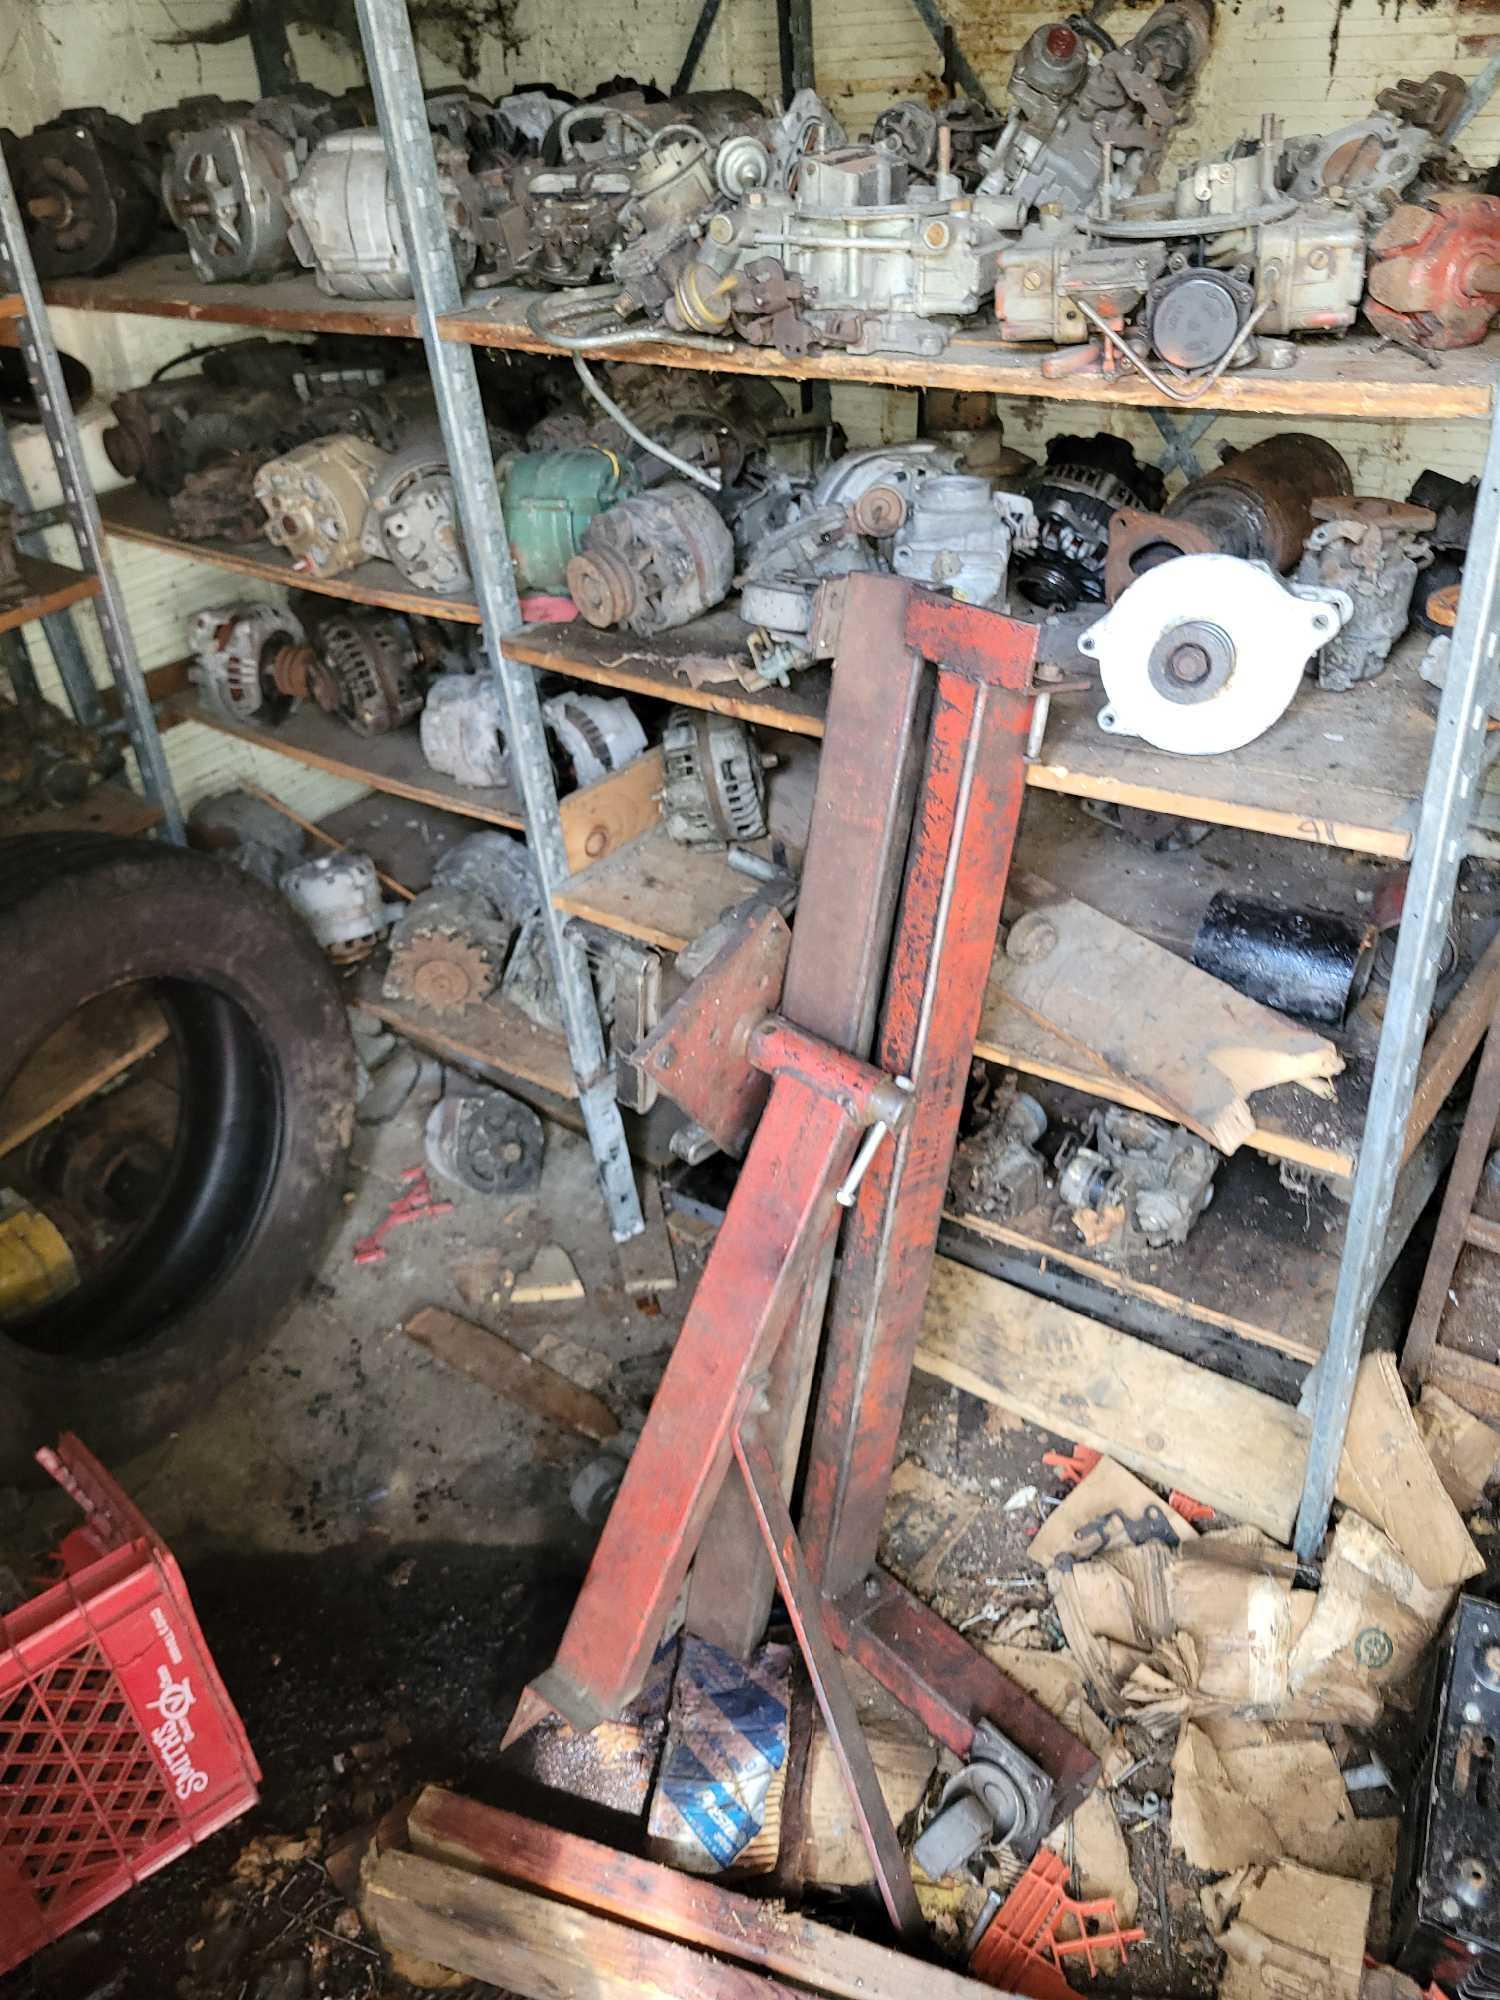 Contents of building, carburetors, engine stand, motor, scaffolding pieces, and more